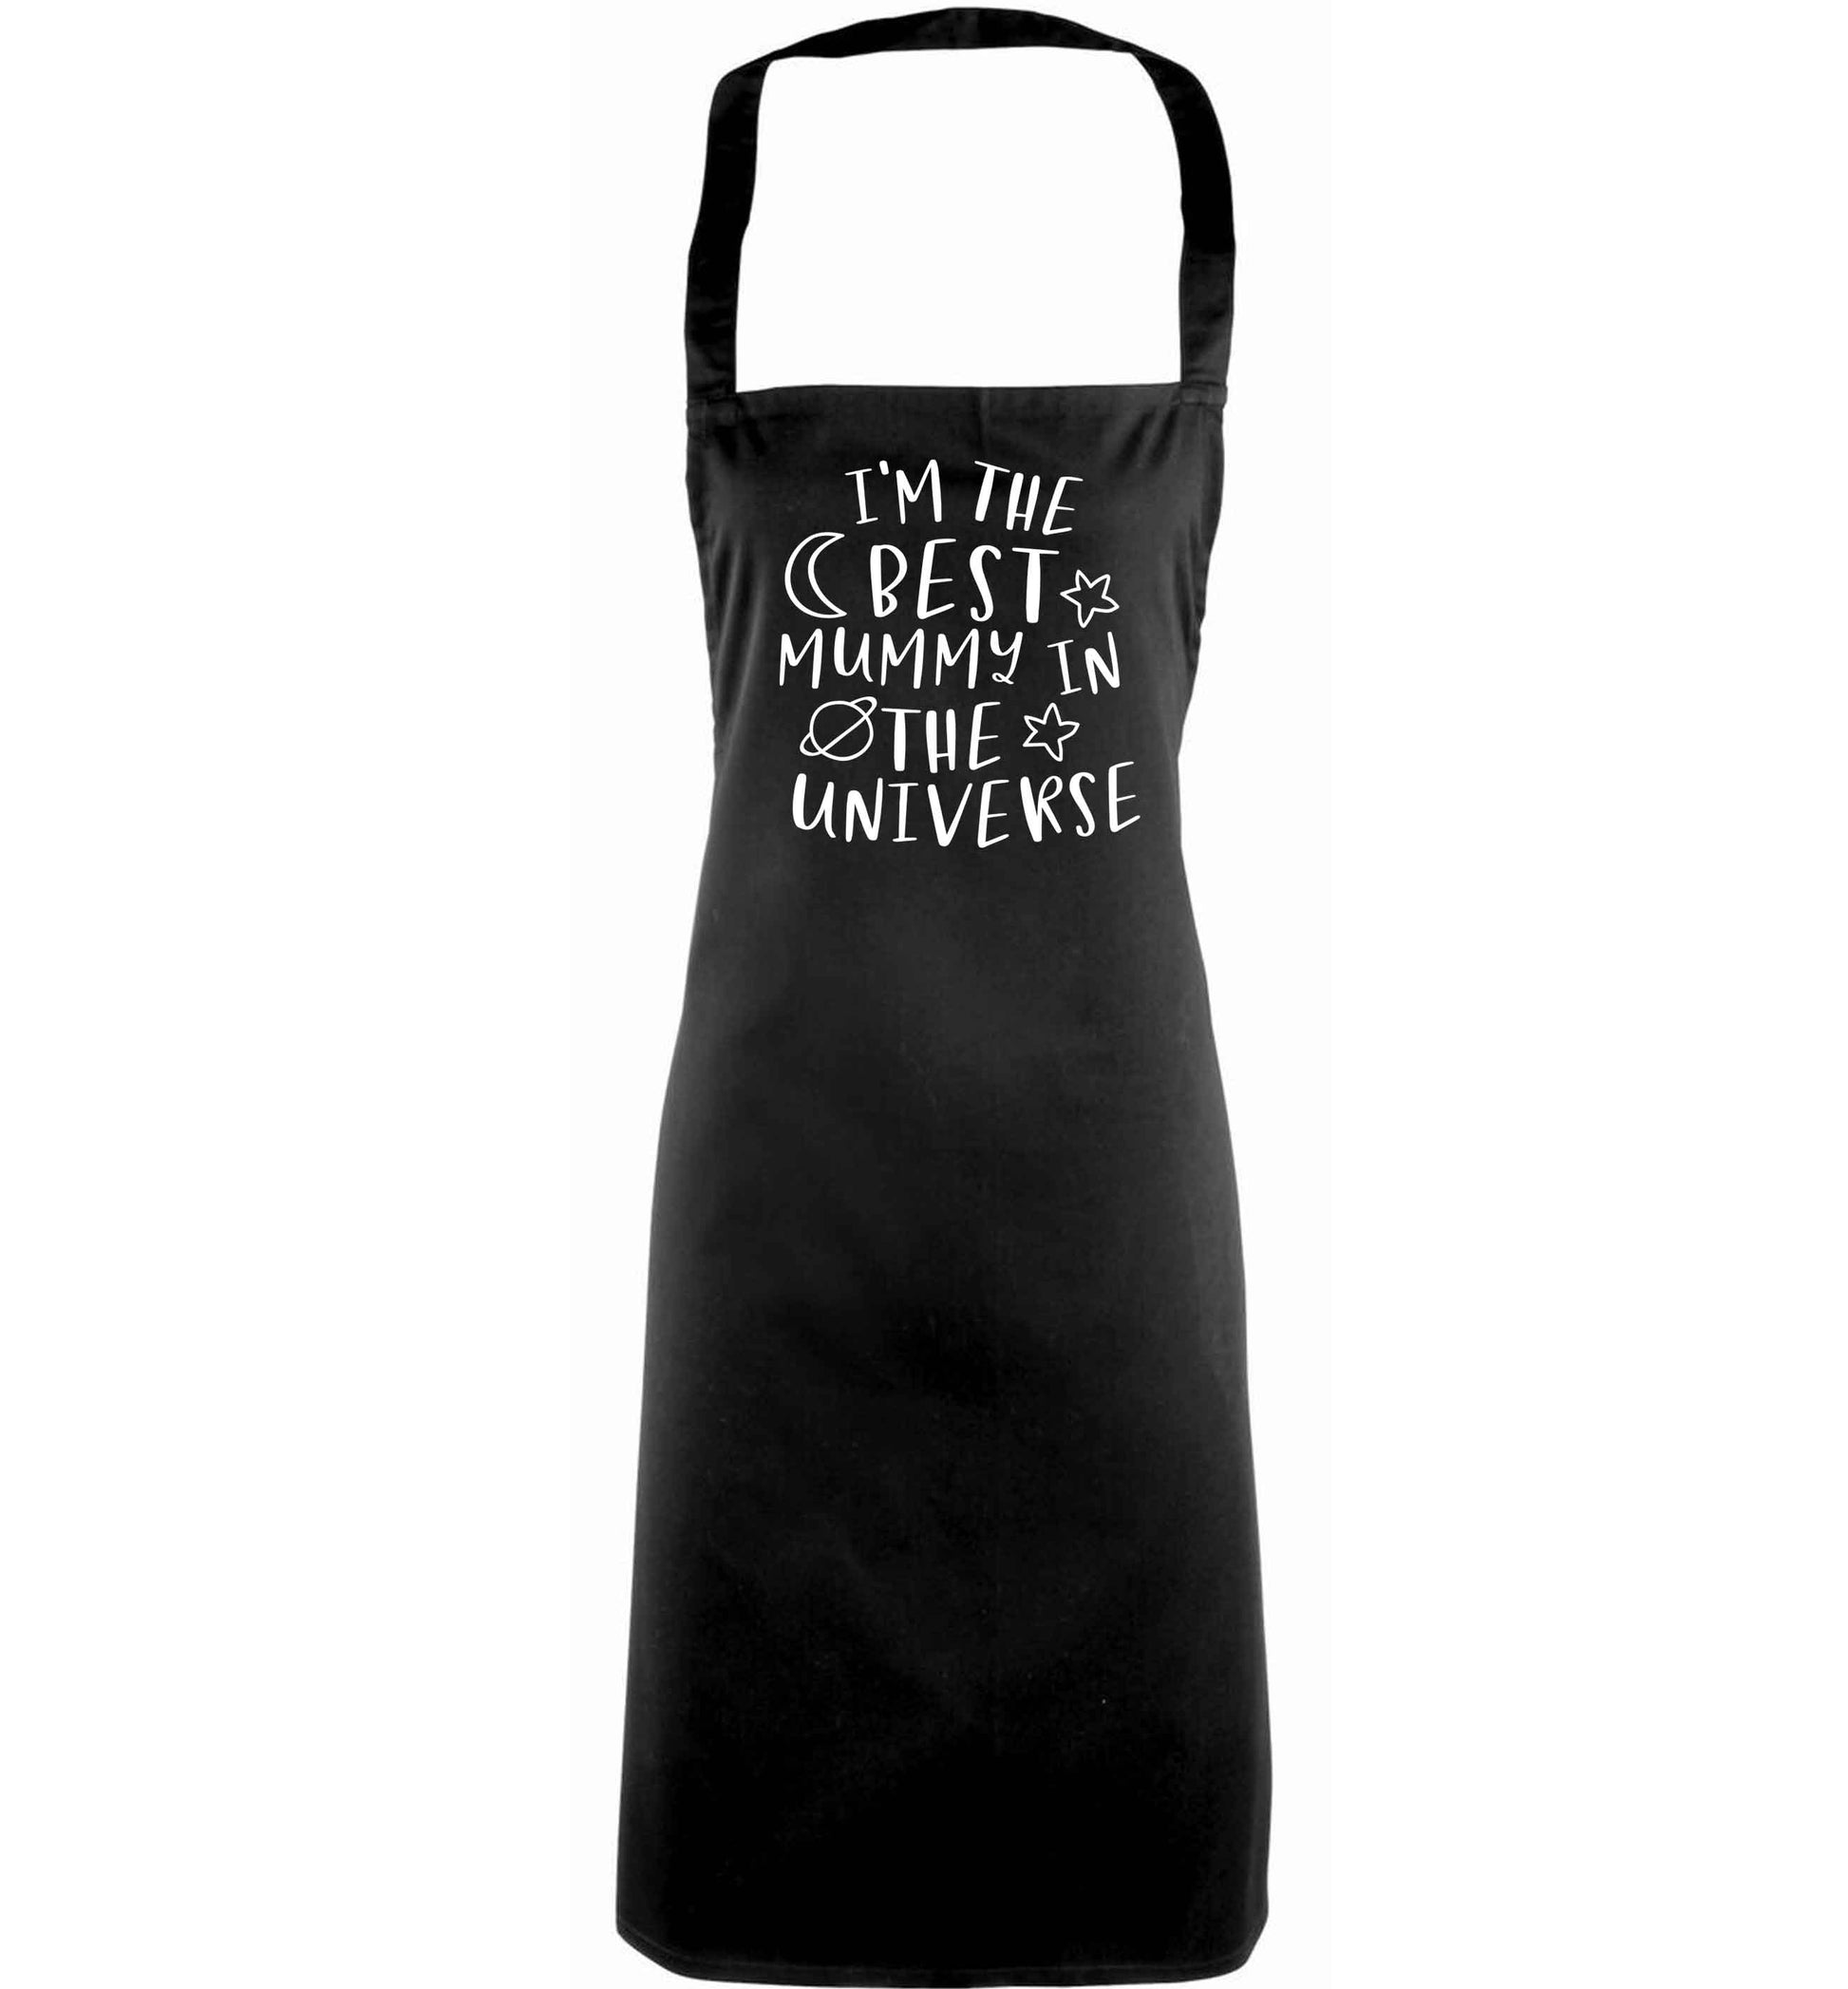 I'm the best mummy in the universe adults black apron